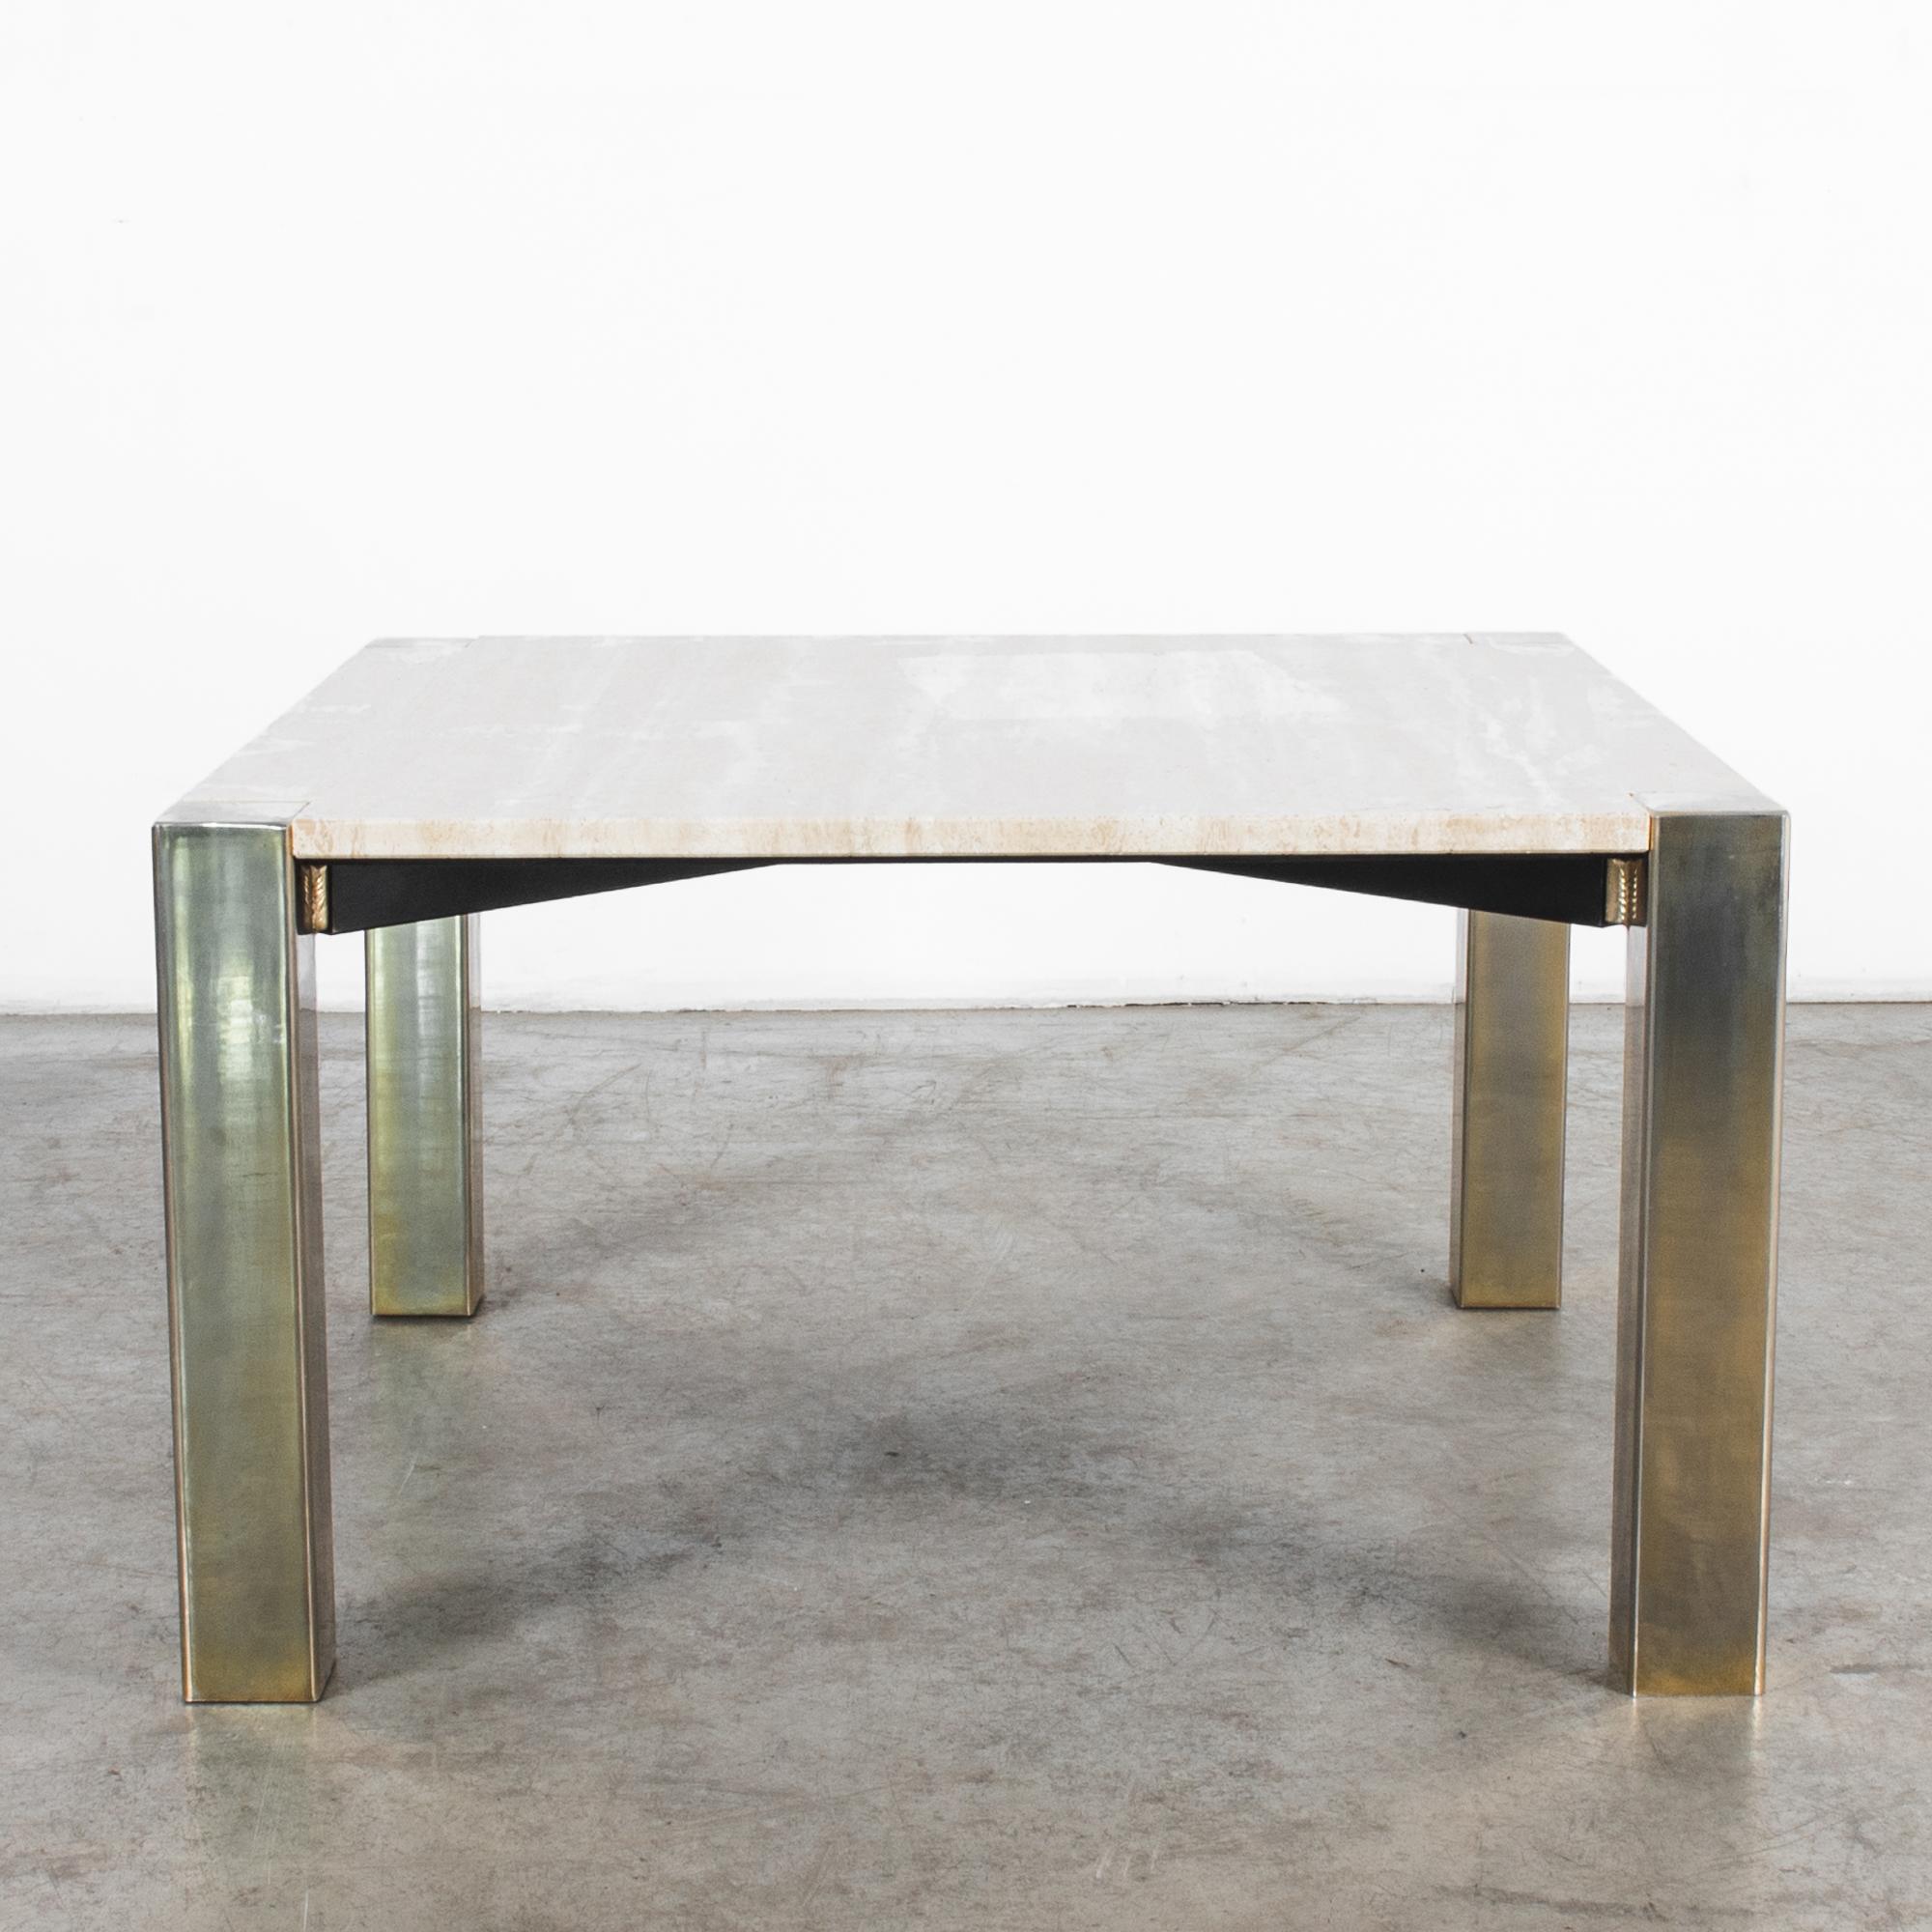 A sleek design from Italy, minimal metal legs, plated in brass, hold a square travertine top in this 1970s coffee table. 80 centimeters by 80 centimeters, carefully polished and cut, the brass legs interlock with stone to complete the stark